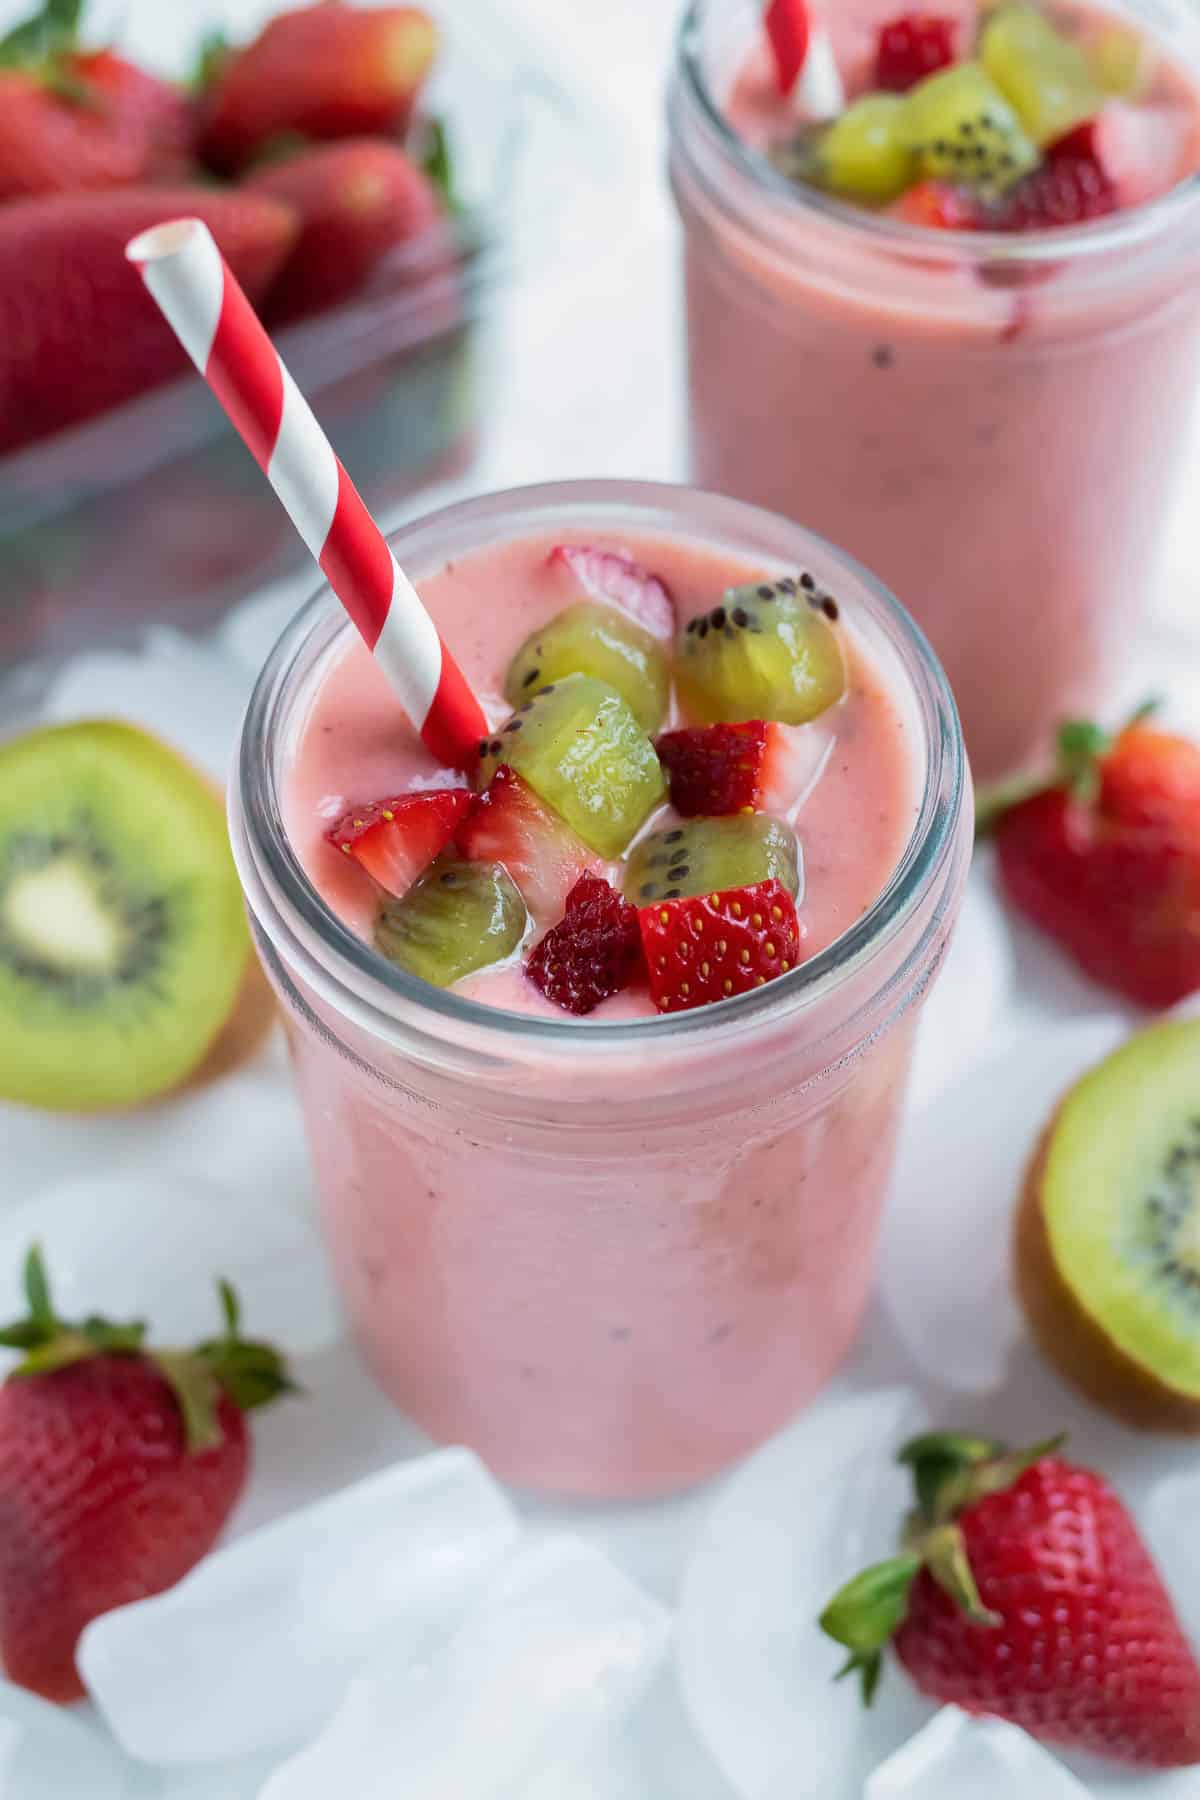 Strawberry Kefir Smoothie with Oats – Creamy, Tasty, & Easy!